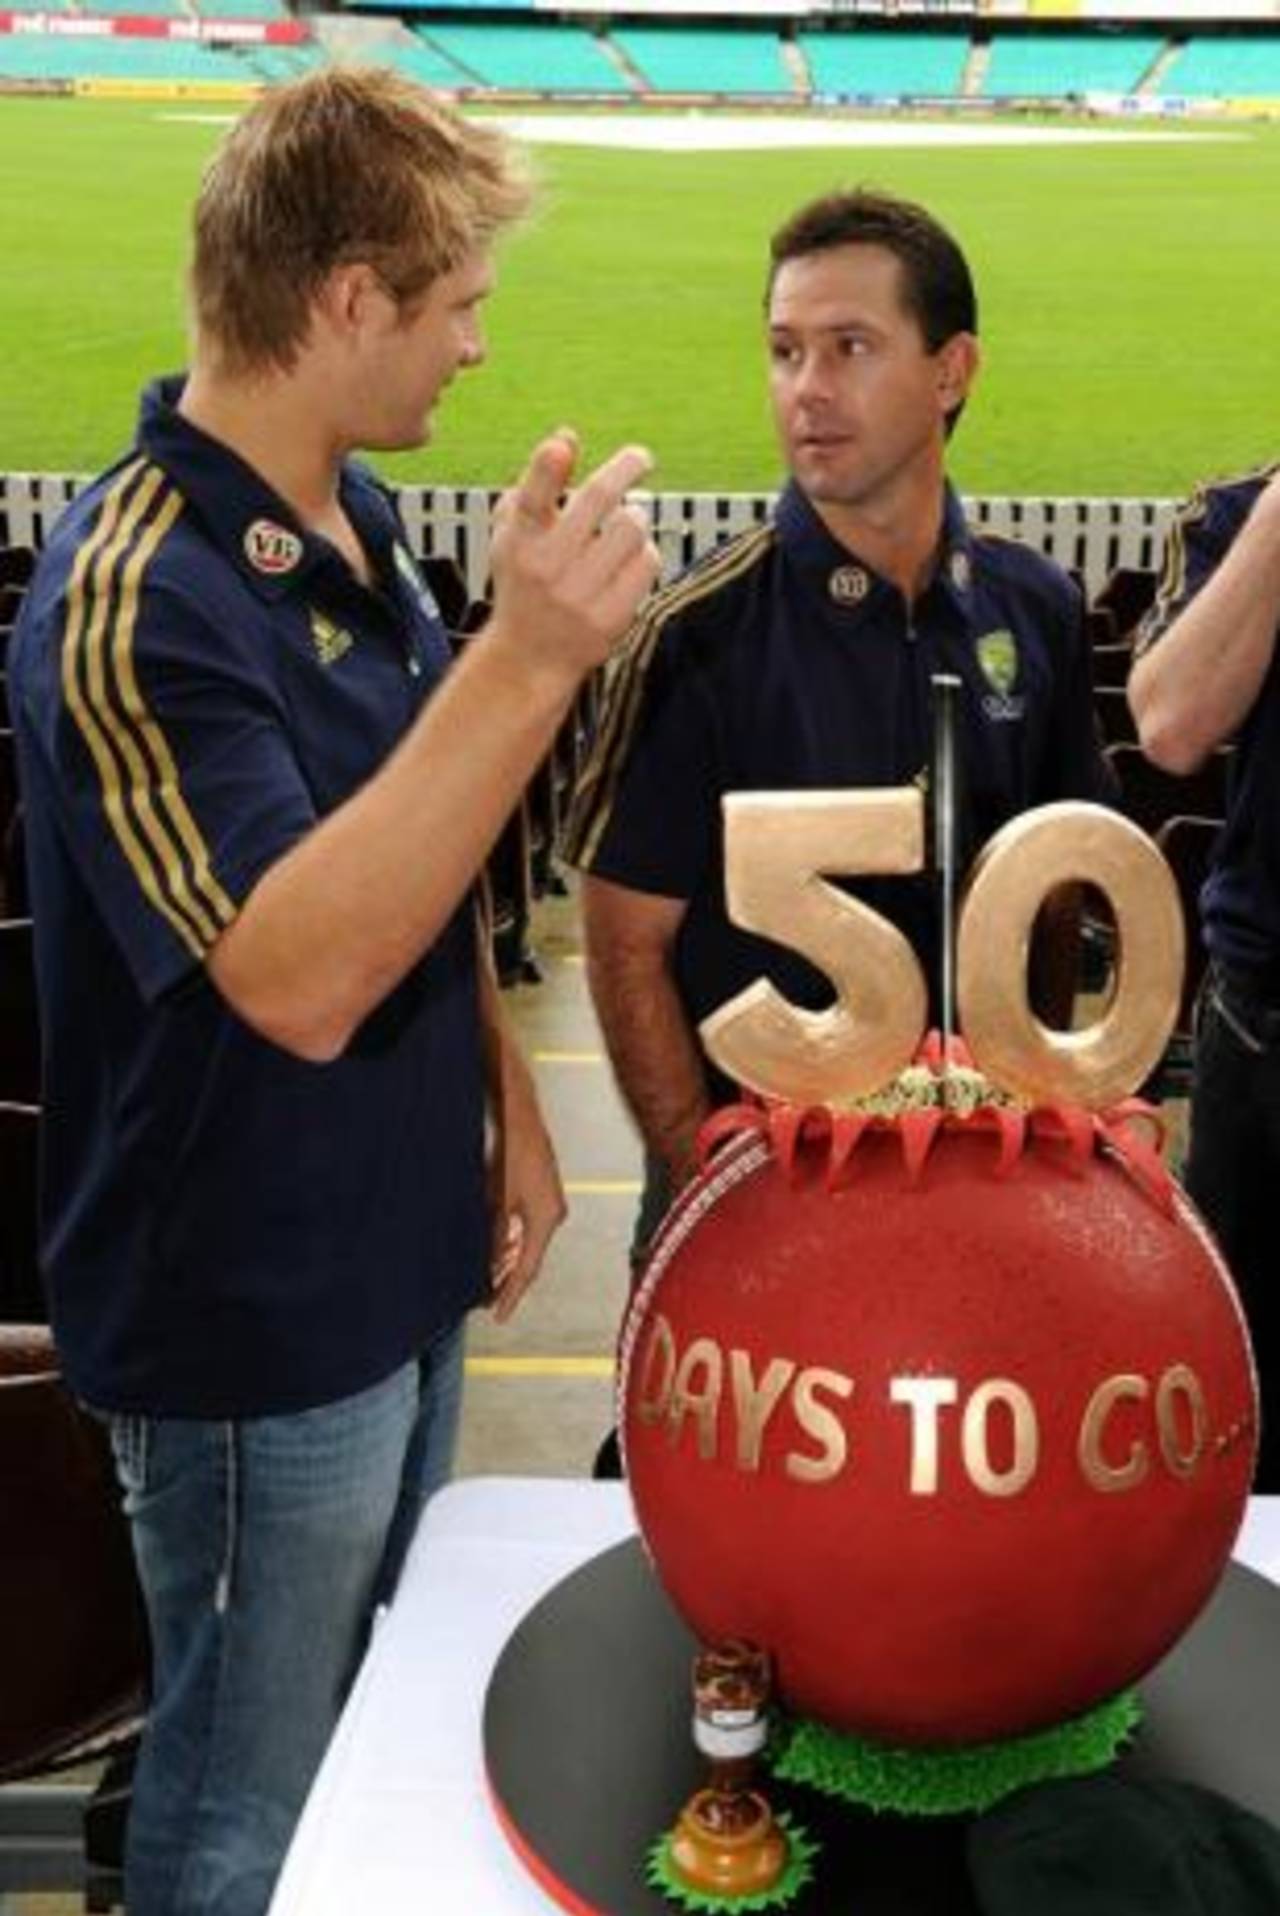 Shane Watson and Ricky Ponting pose with a '50 days to go for the Ashes' cake, Sydney, May 20, 2009